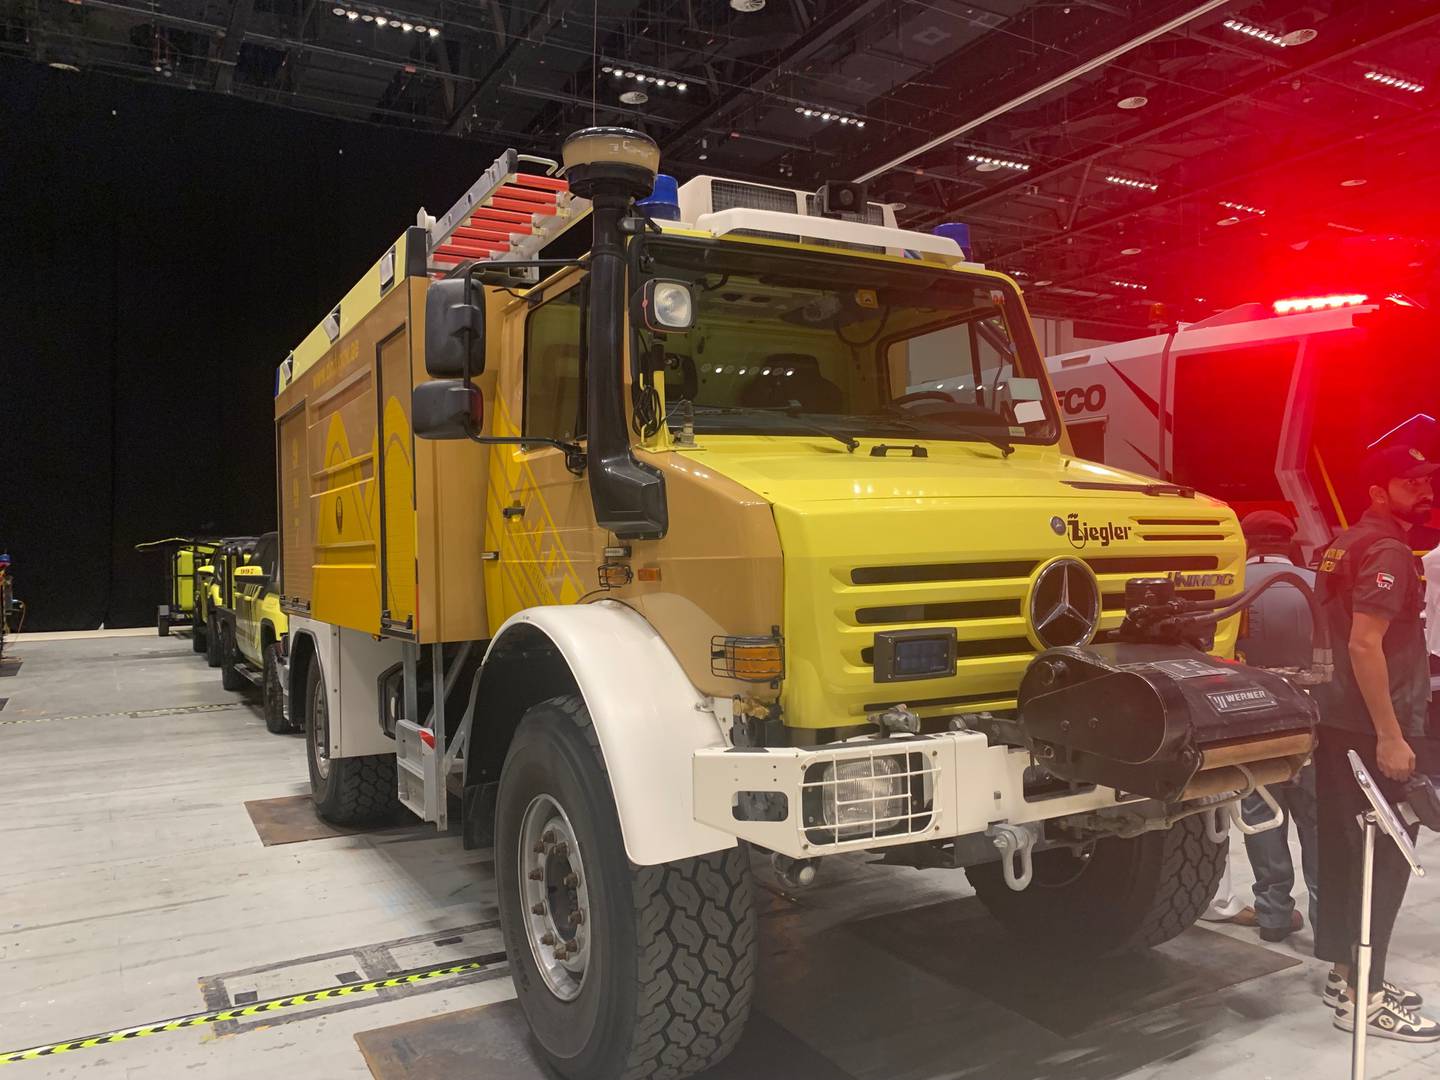 Dubai Civil Defence has also bought two Mercedes-Benz Unimog lorries, 4x4s with off-road capability, to help with rescue missions. Photo: Ali Al Shouk / The National